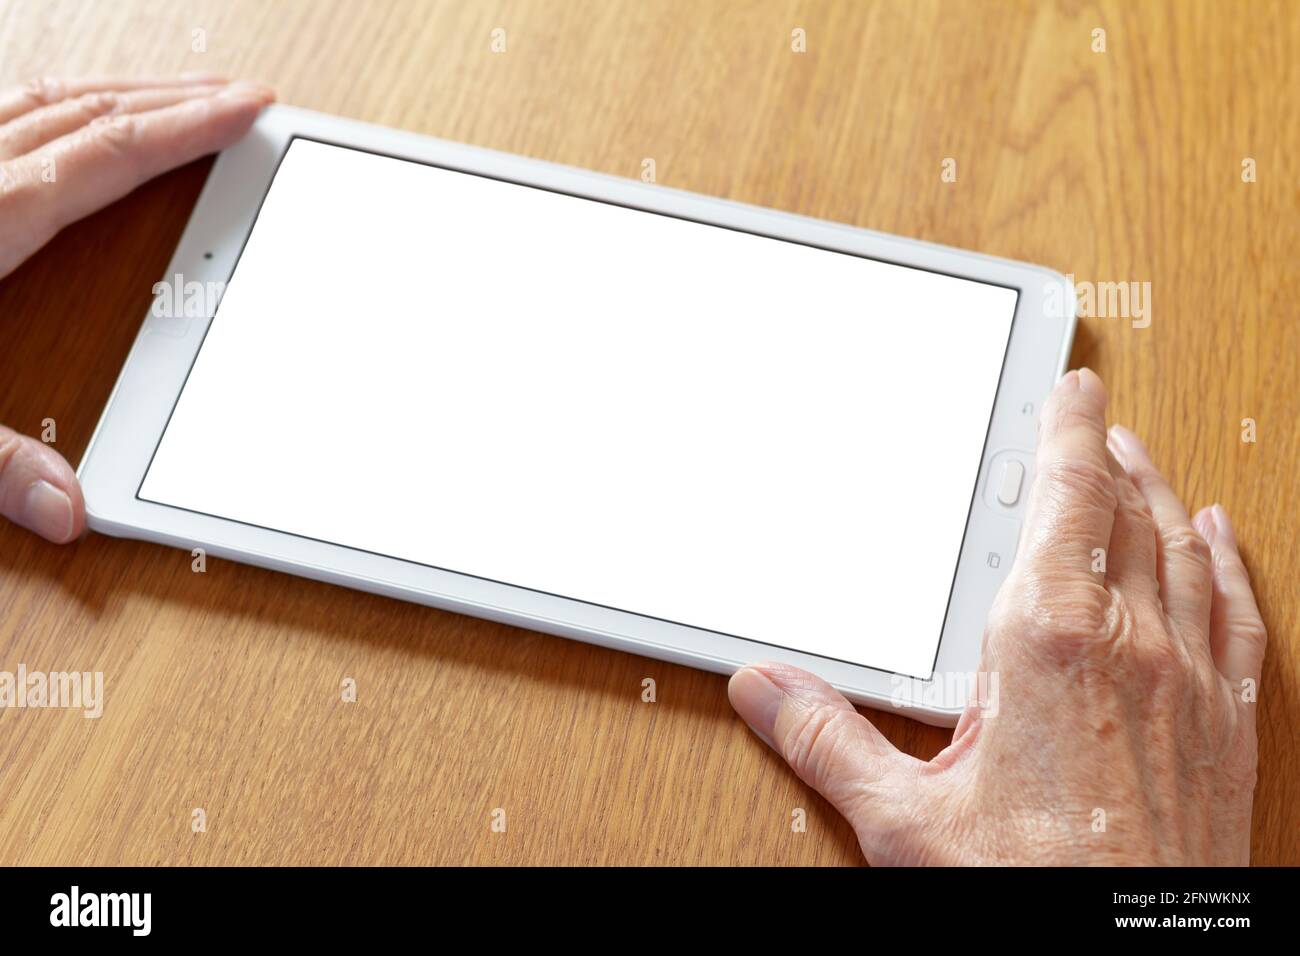 Online video phone call mock up: hands of an old woman holding a tablet computer with a blank white screen. Stock Photo